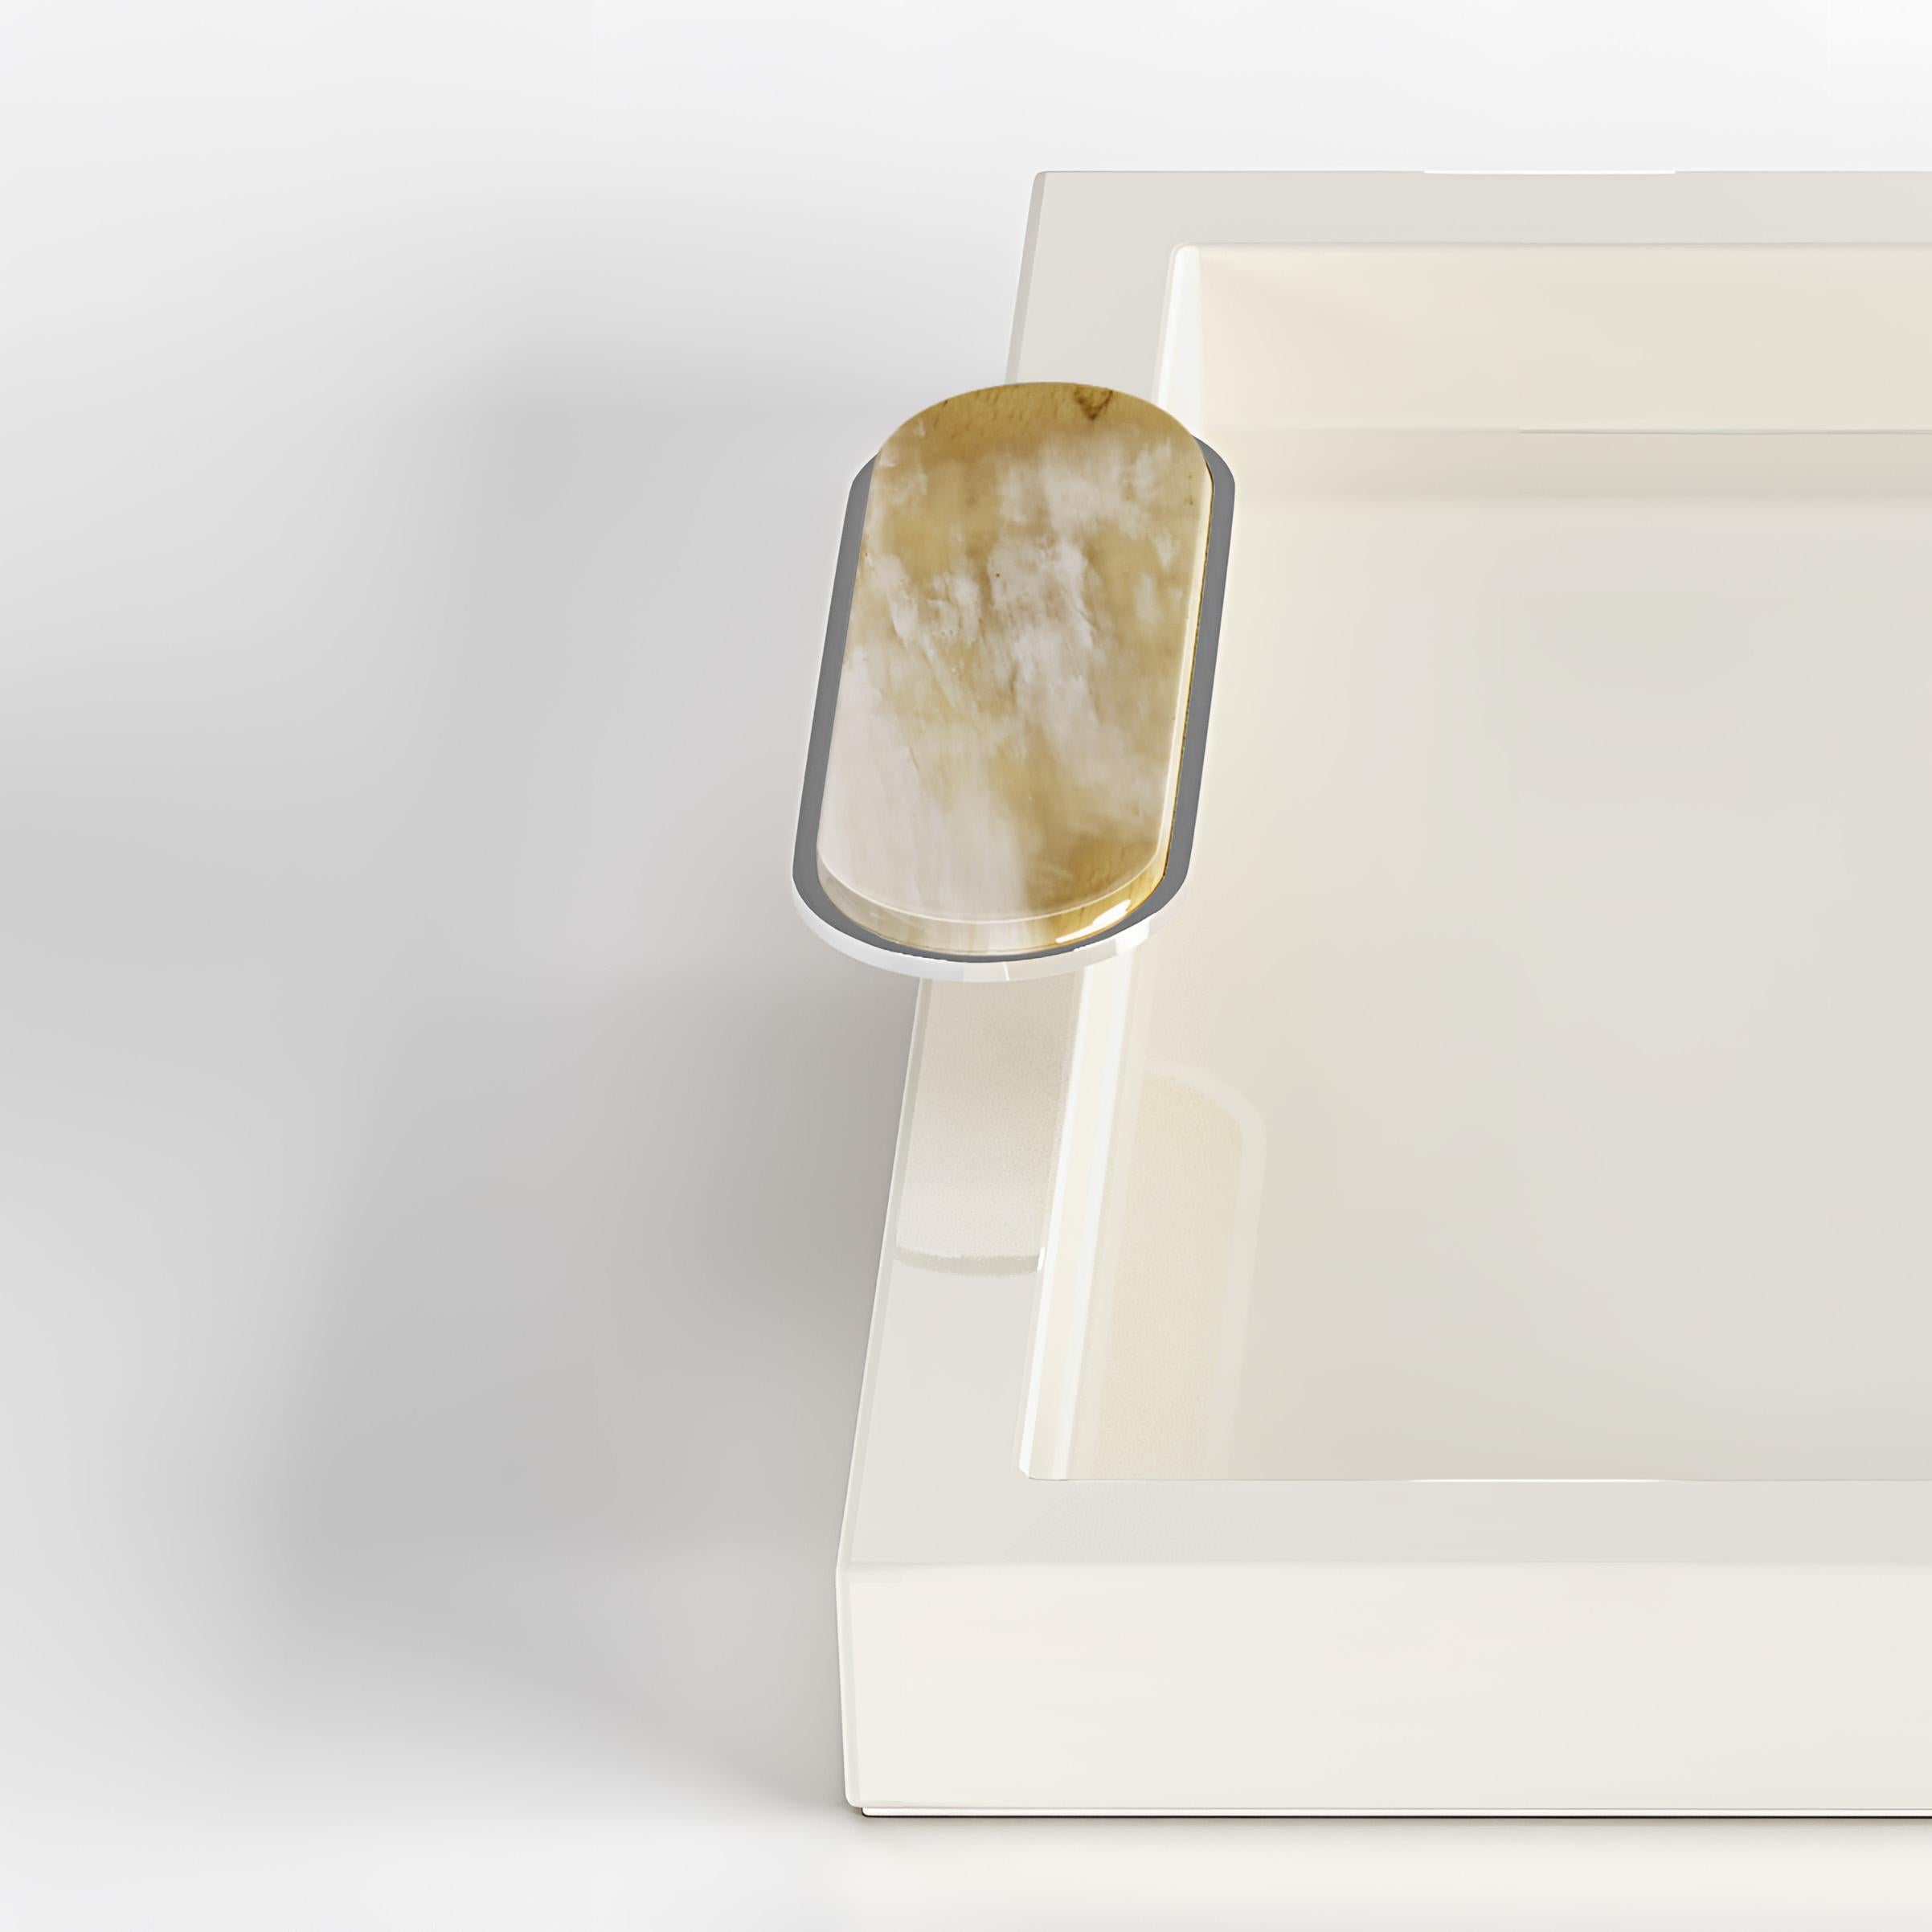 Berro is a practical and versatile tray designed for serving snacks and beverages with unparalleled elegance. Crafted from glossy ivory lacquered wood, Berro stands out for its refined handles in natural Corno Italiano and chromed brass, showcasing